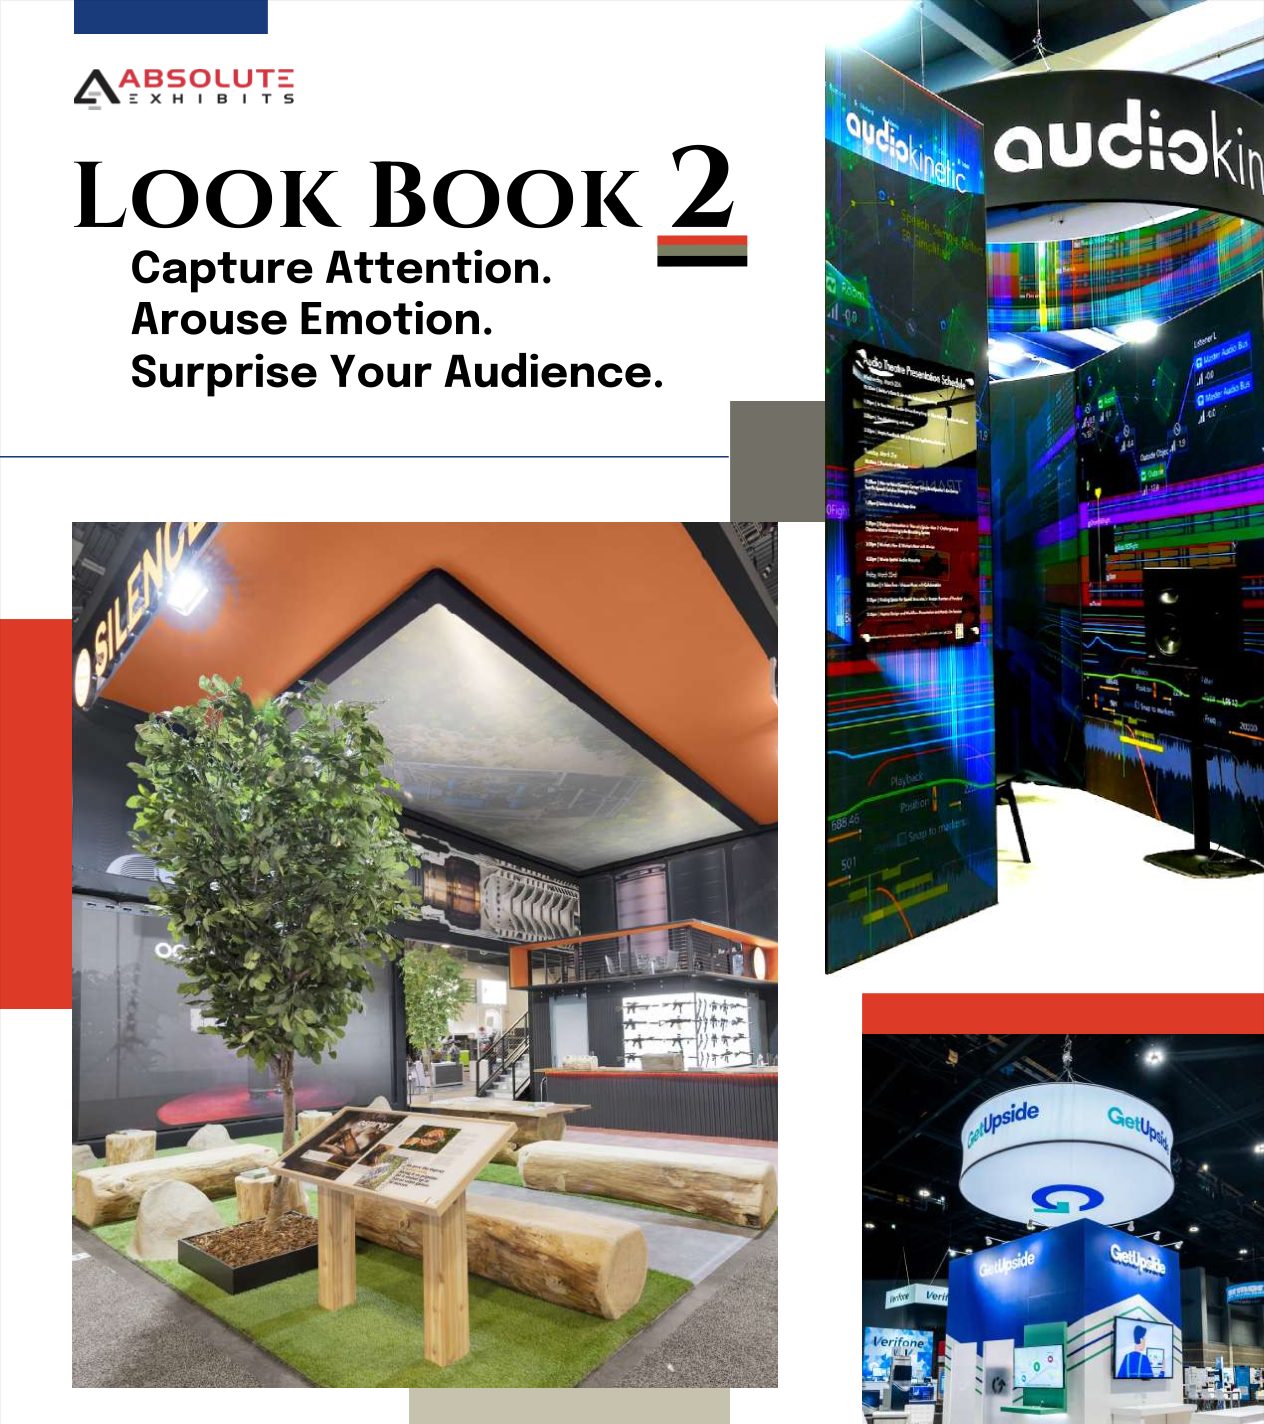  ABSOLUTE EXHIBITS - LOOK BOOK 2